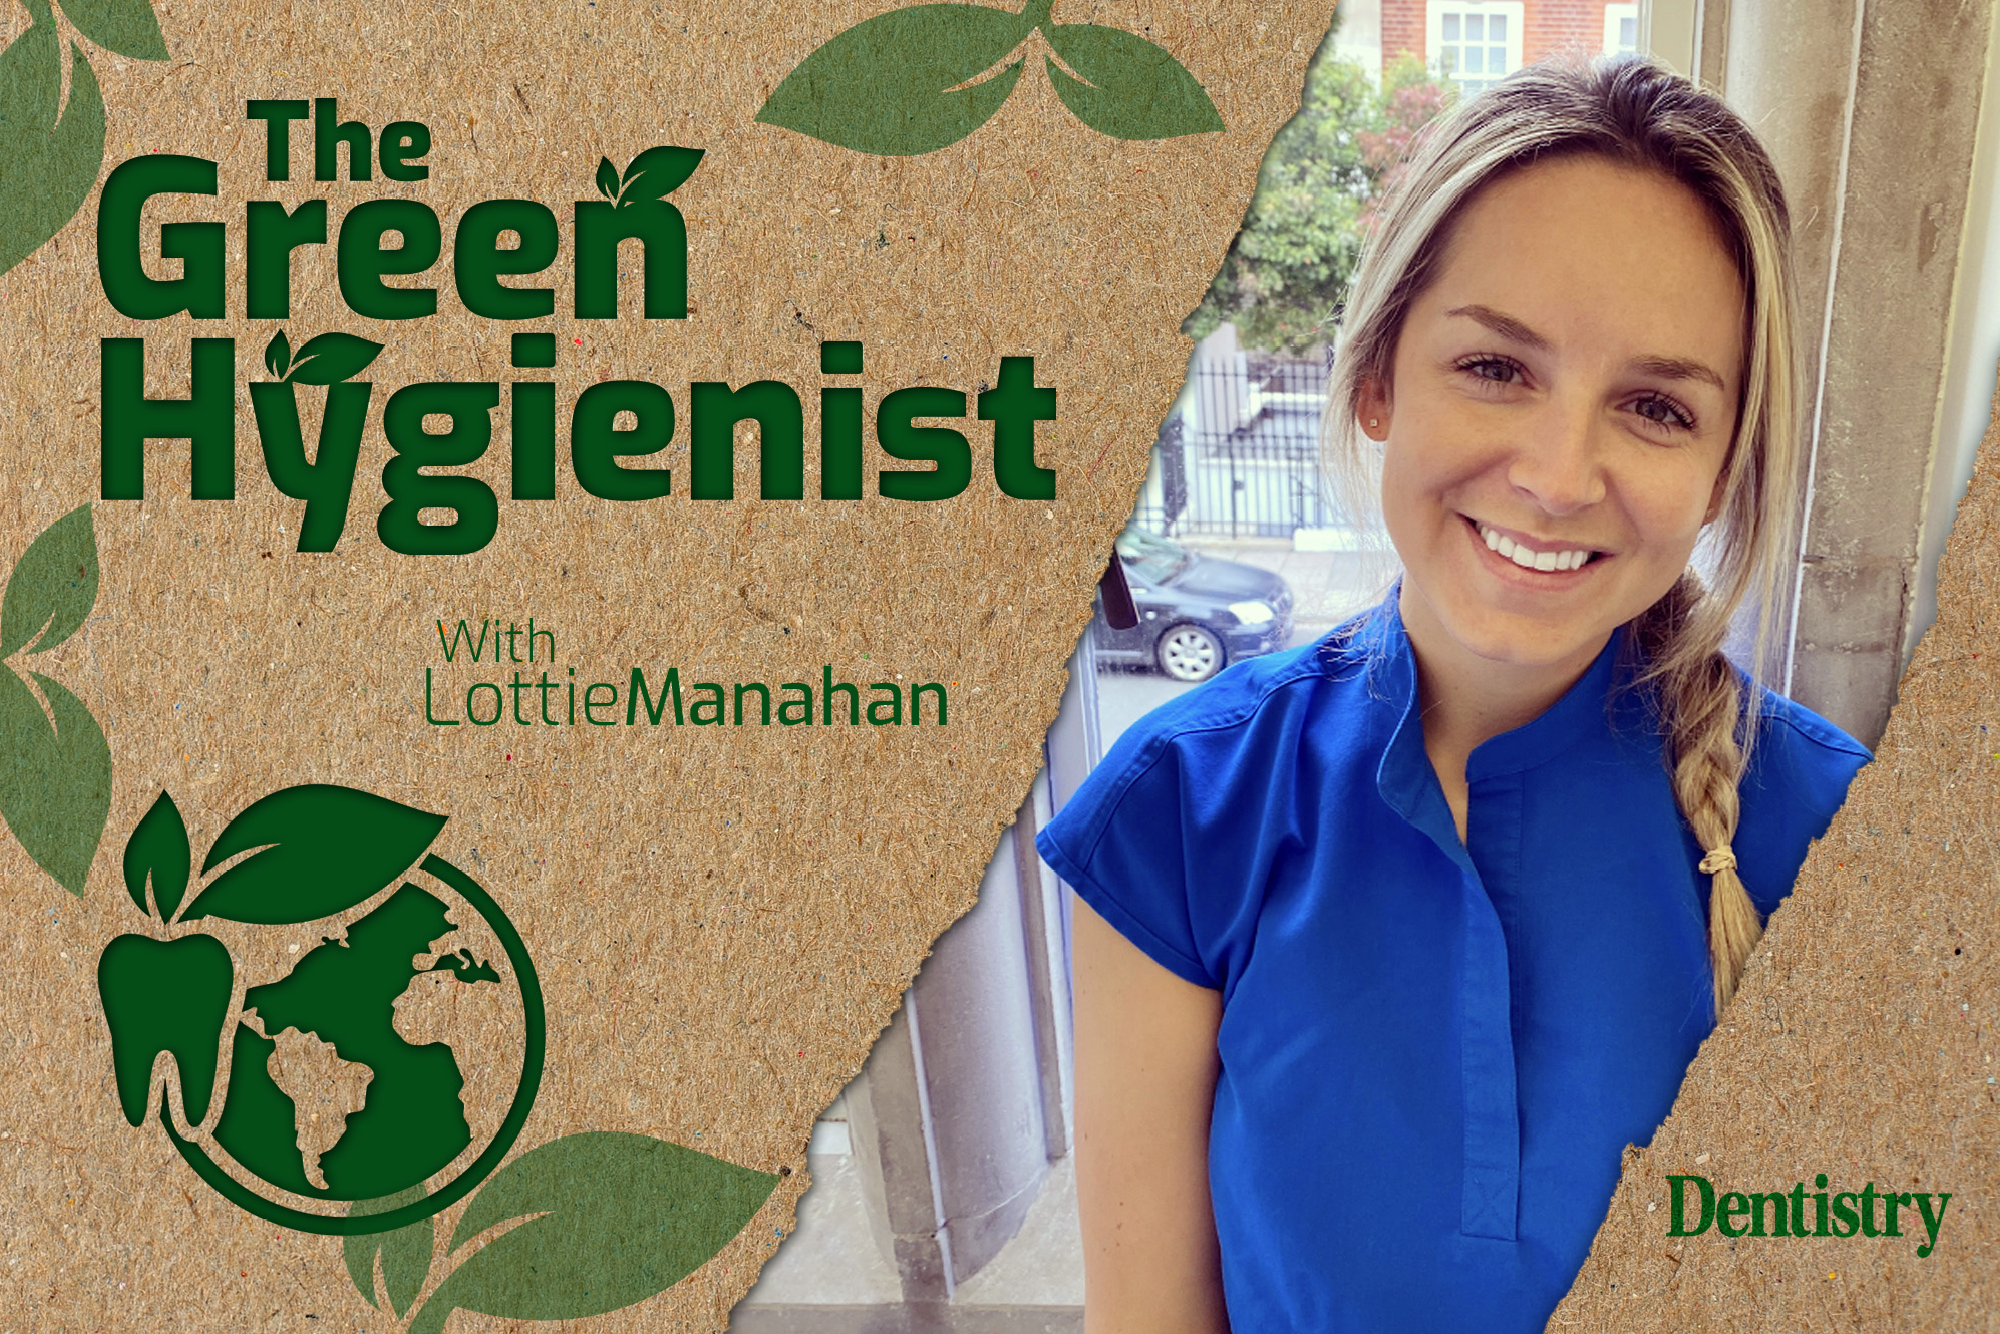 The green hygienist